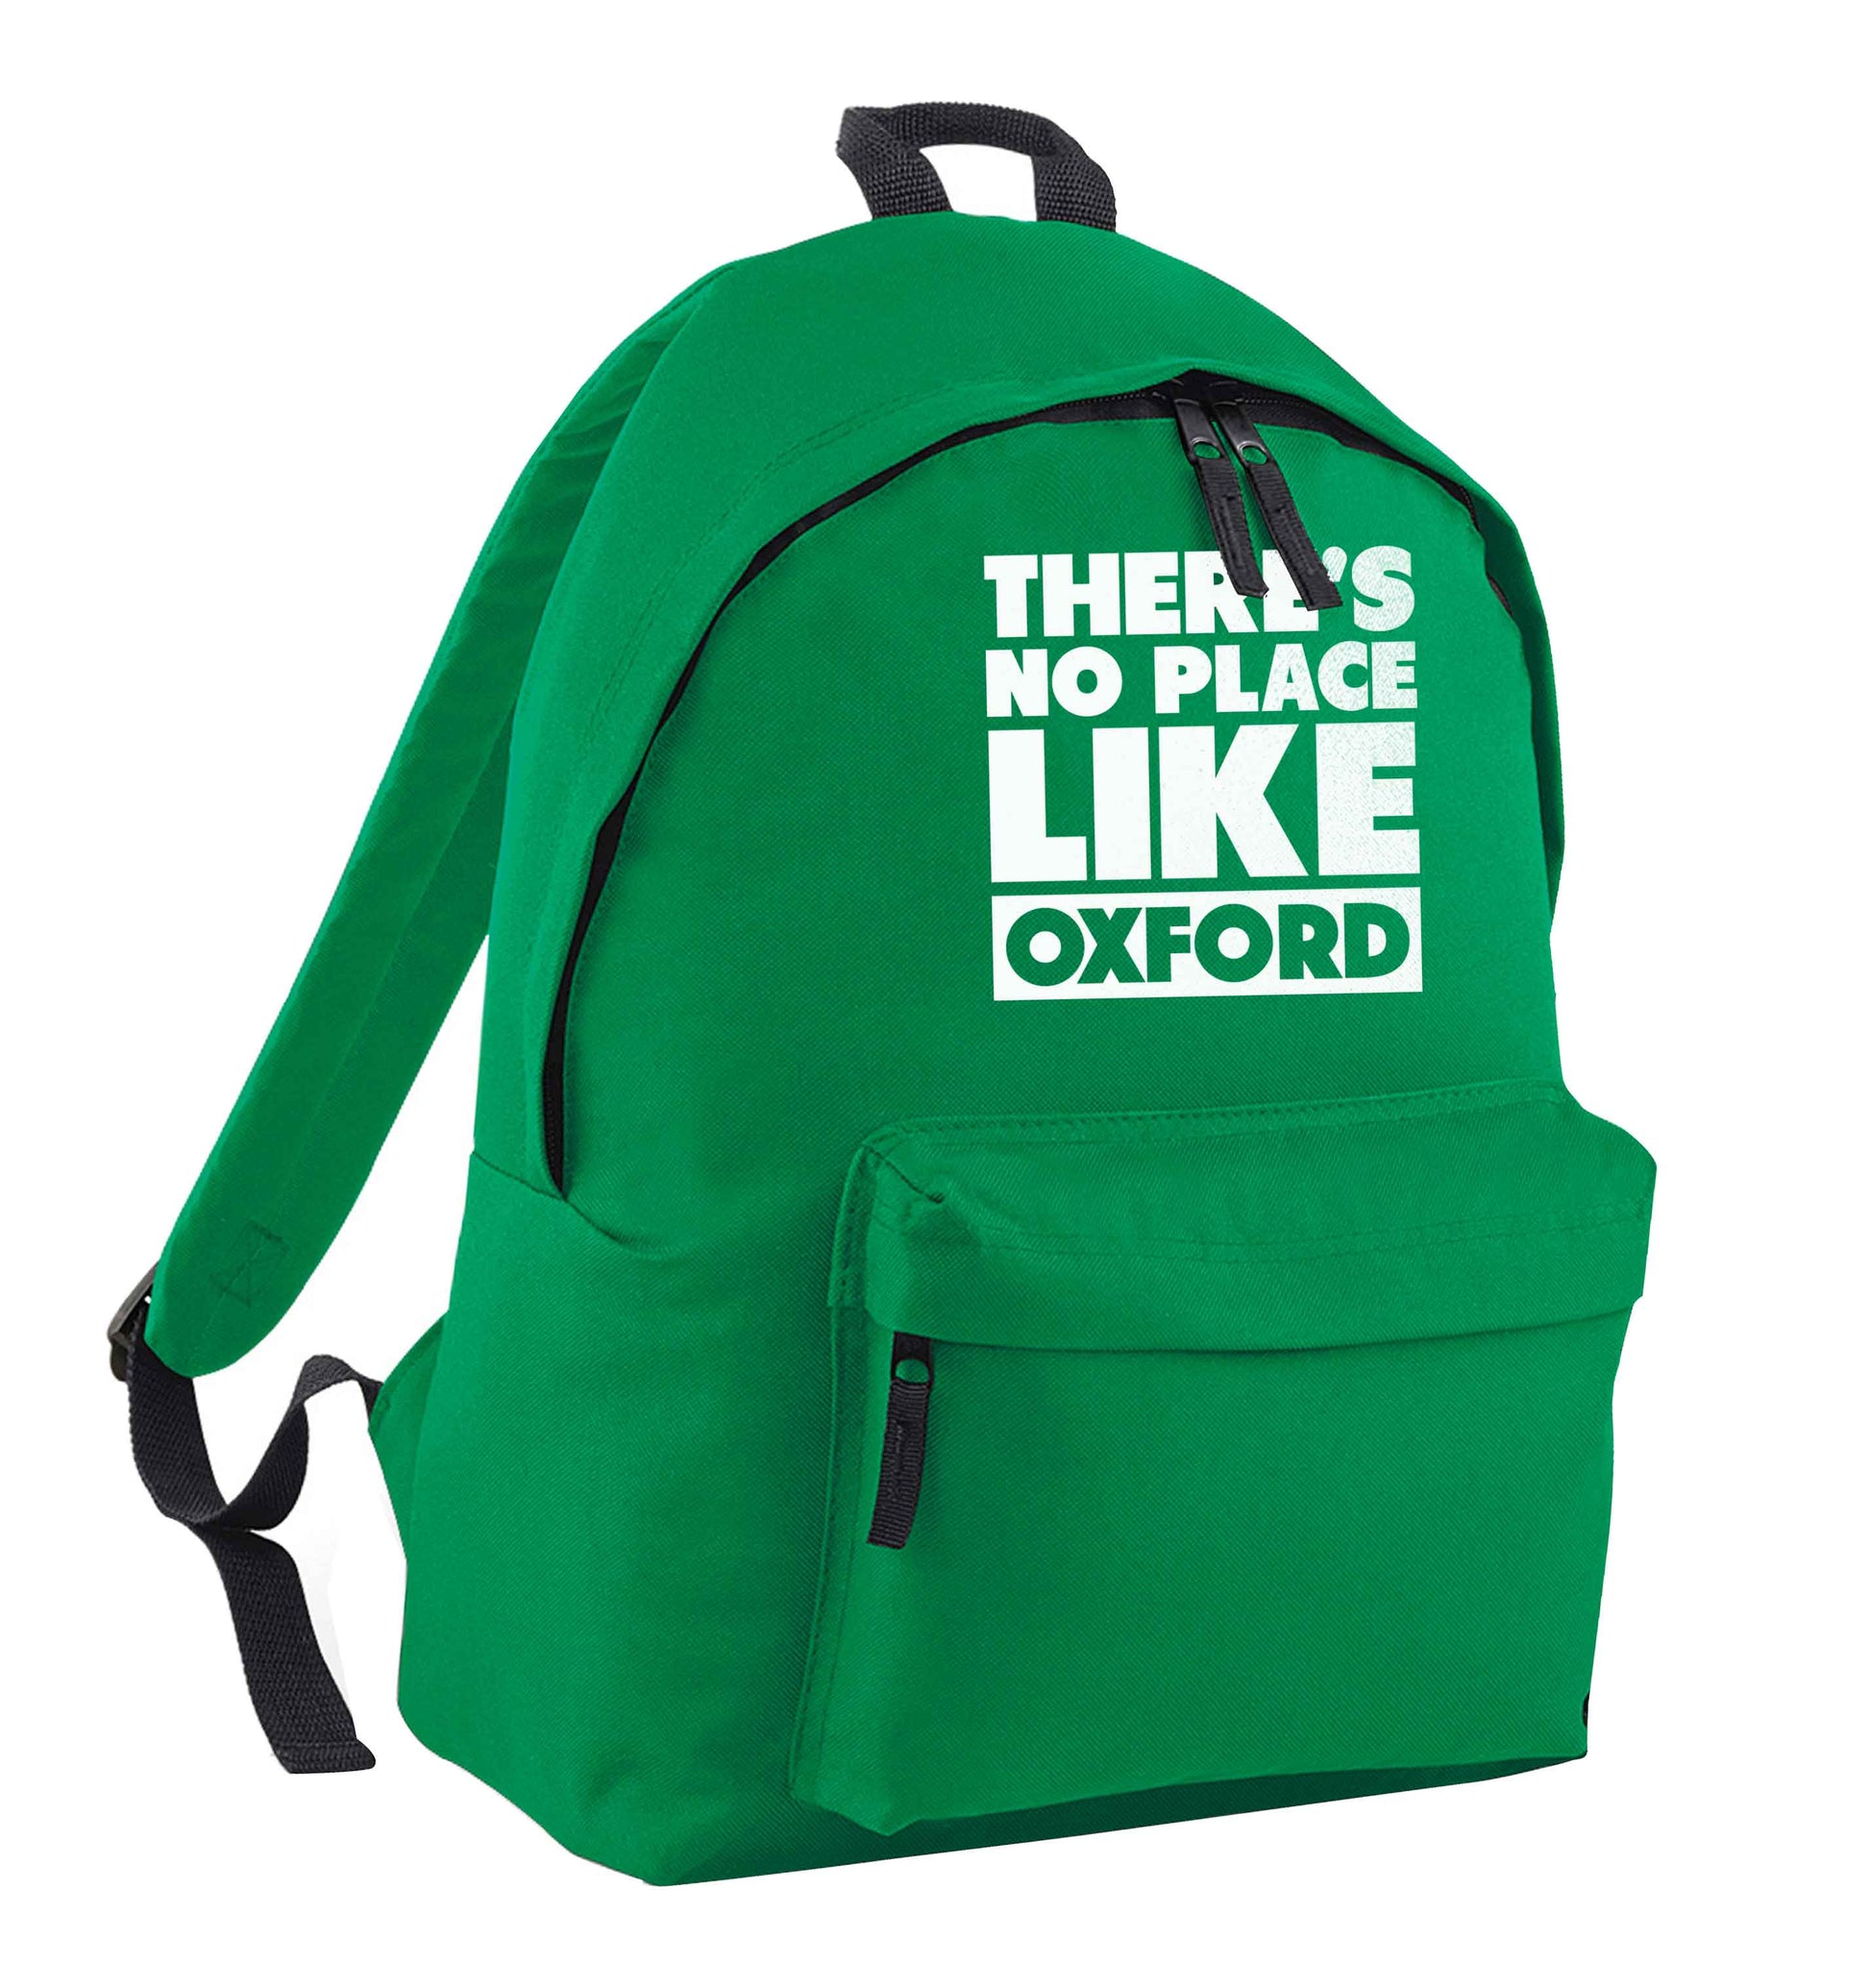 There's no place like Oxford green adults backpack